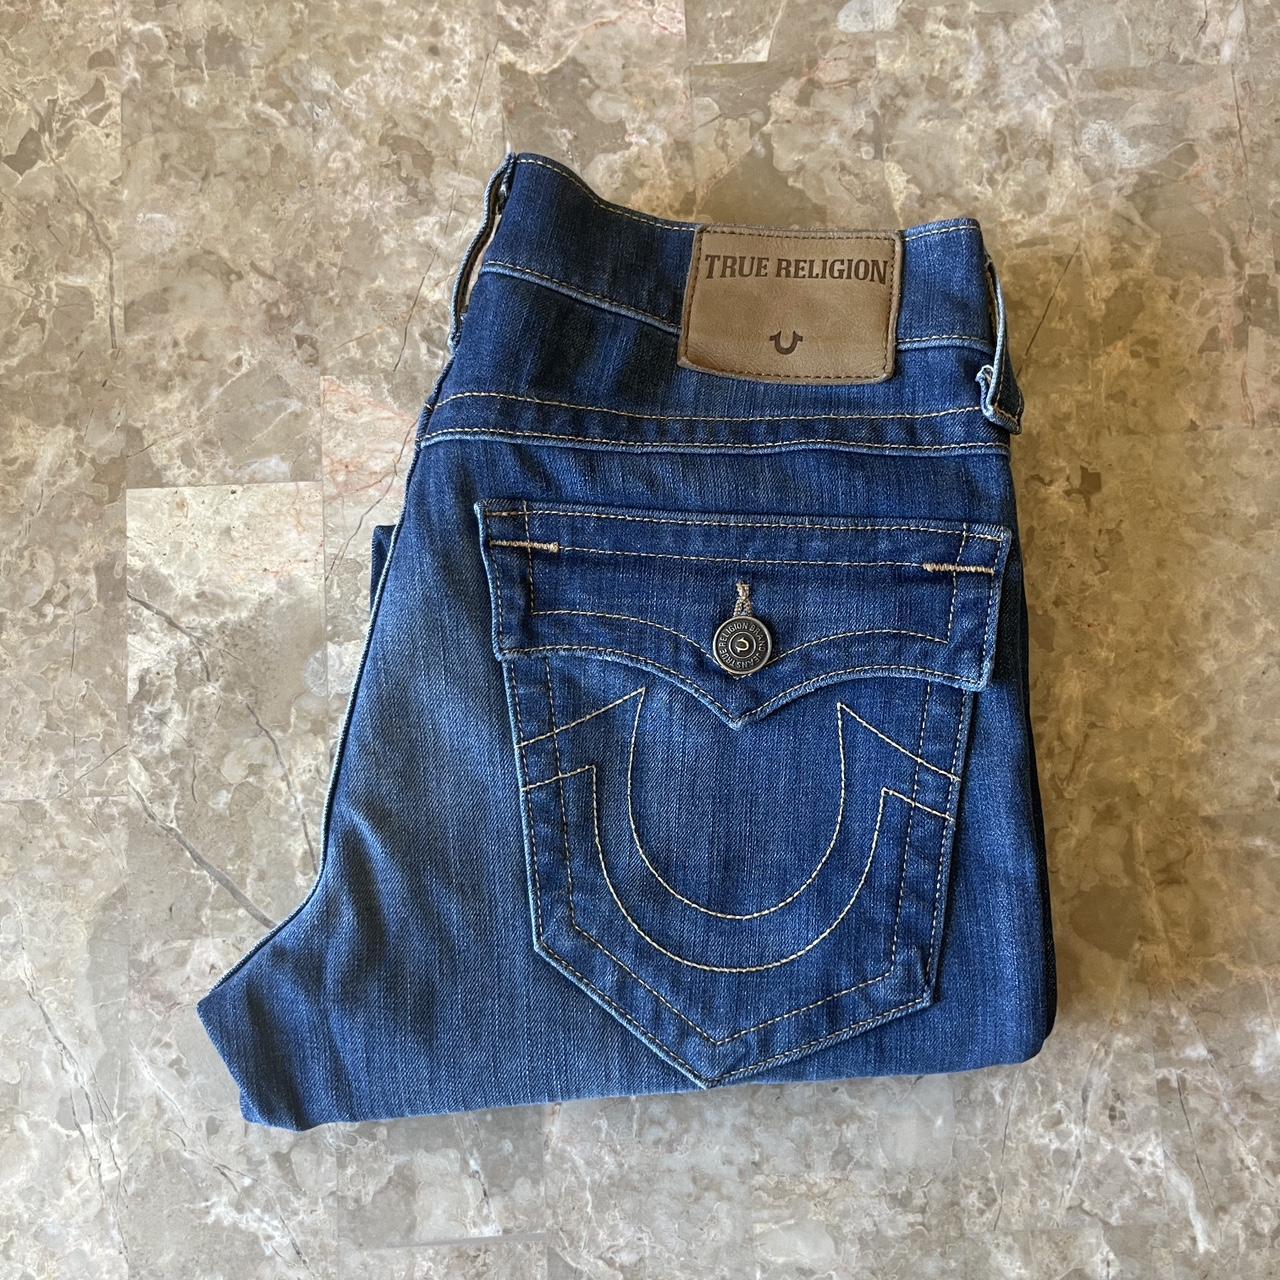 True Religion Ricky Relaxed Slim Jeans Size 29 Fits... - Depop